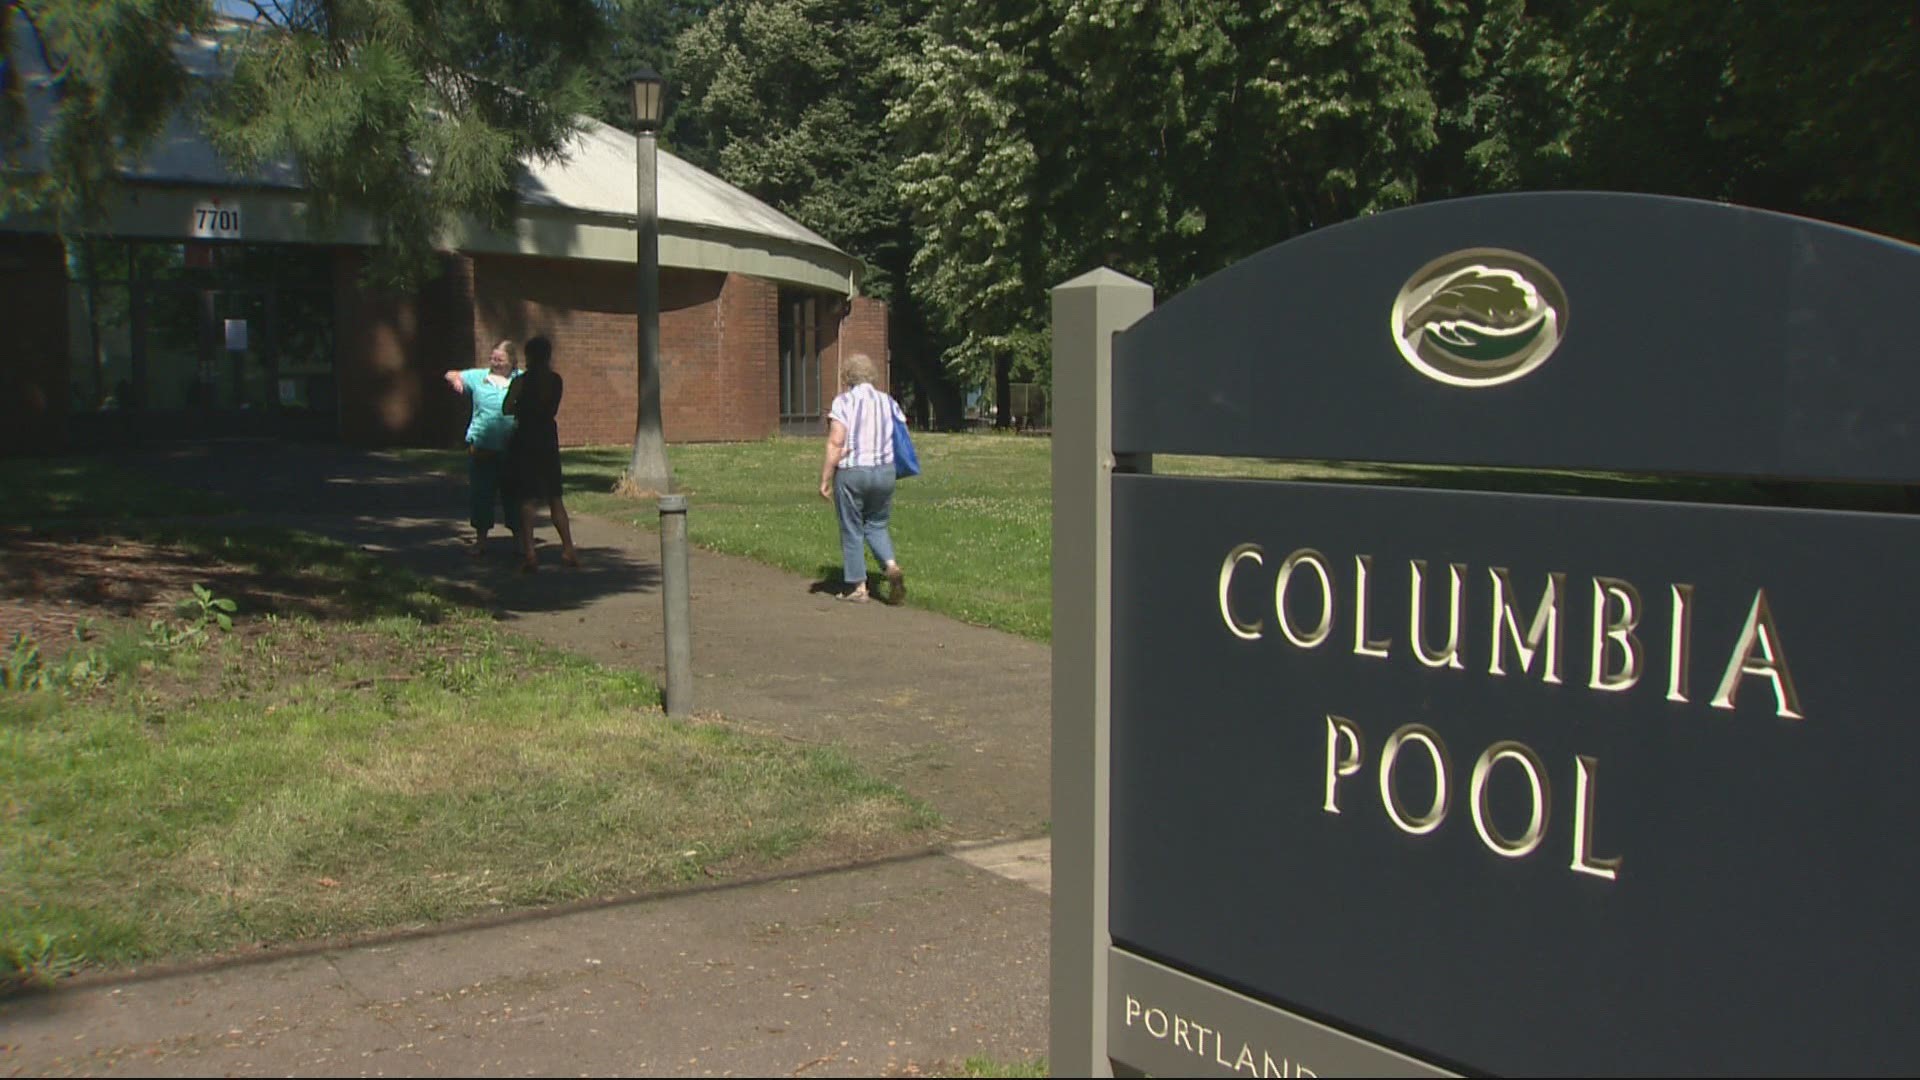 Portland public pools are now open for the summer except for Columbia Indoor Pool. Morgan Romero explains why it is temporarily closed.